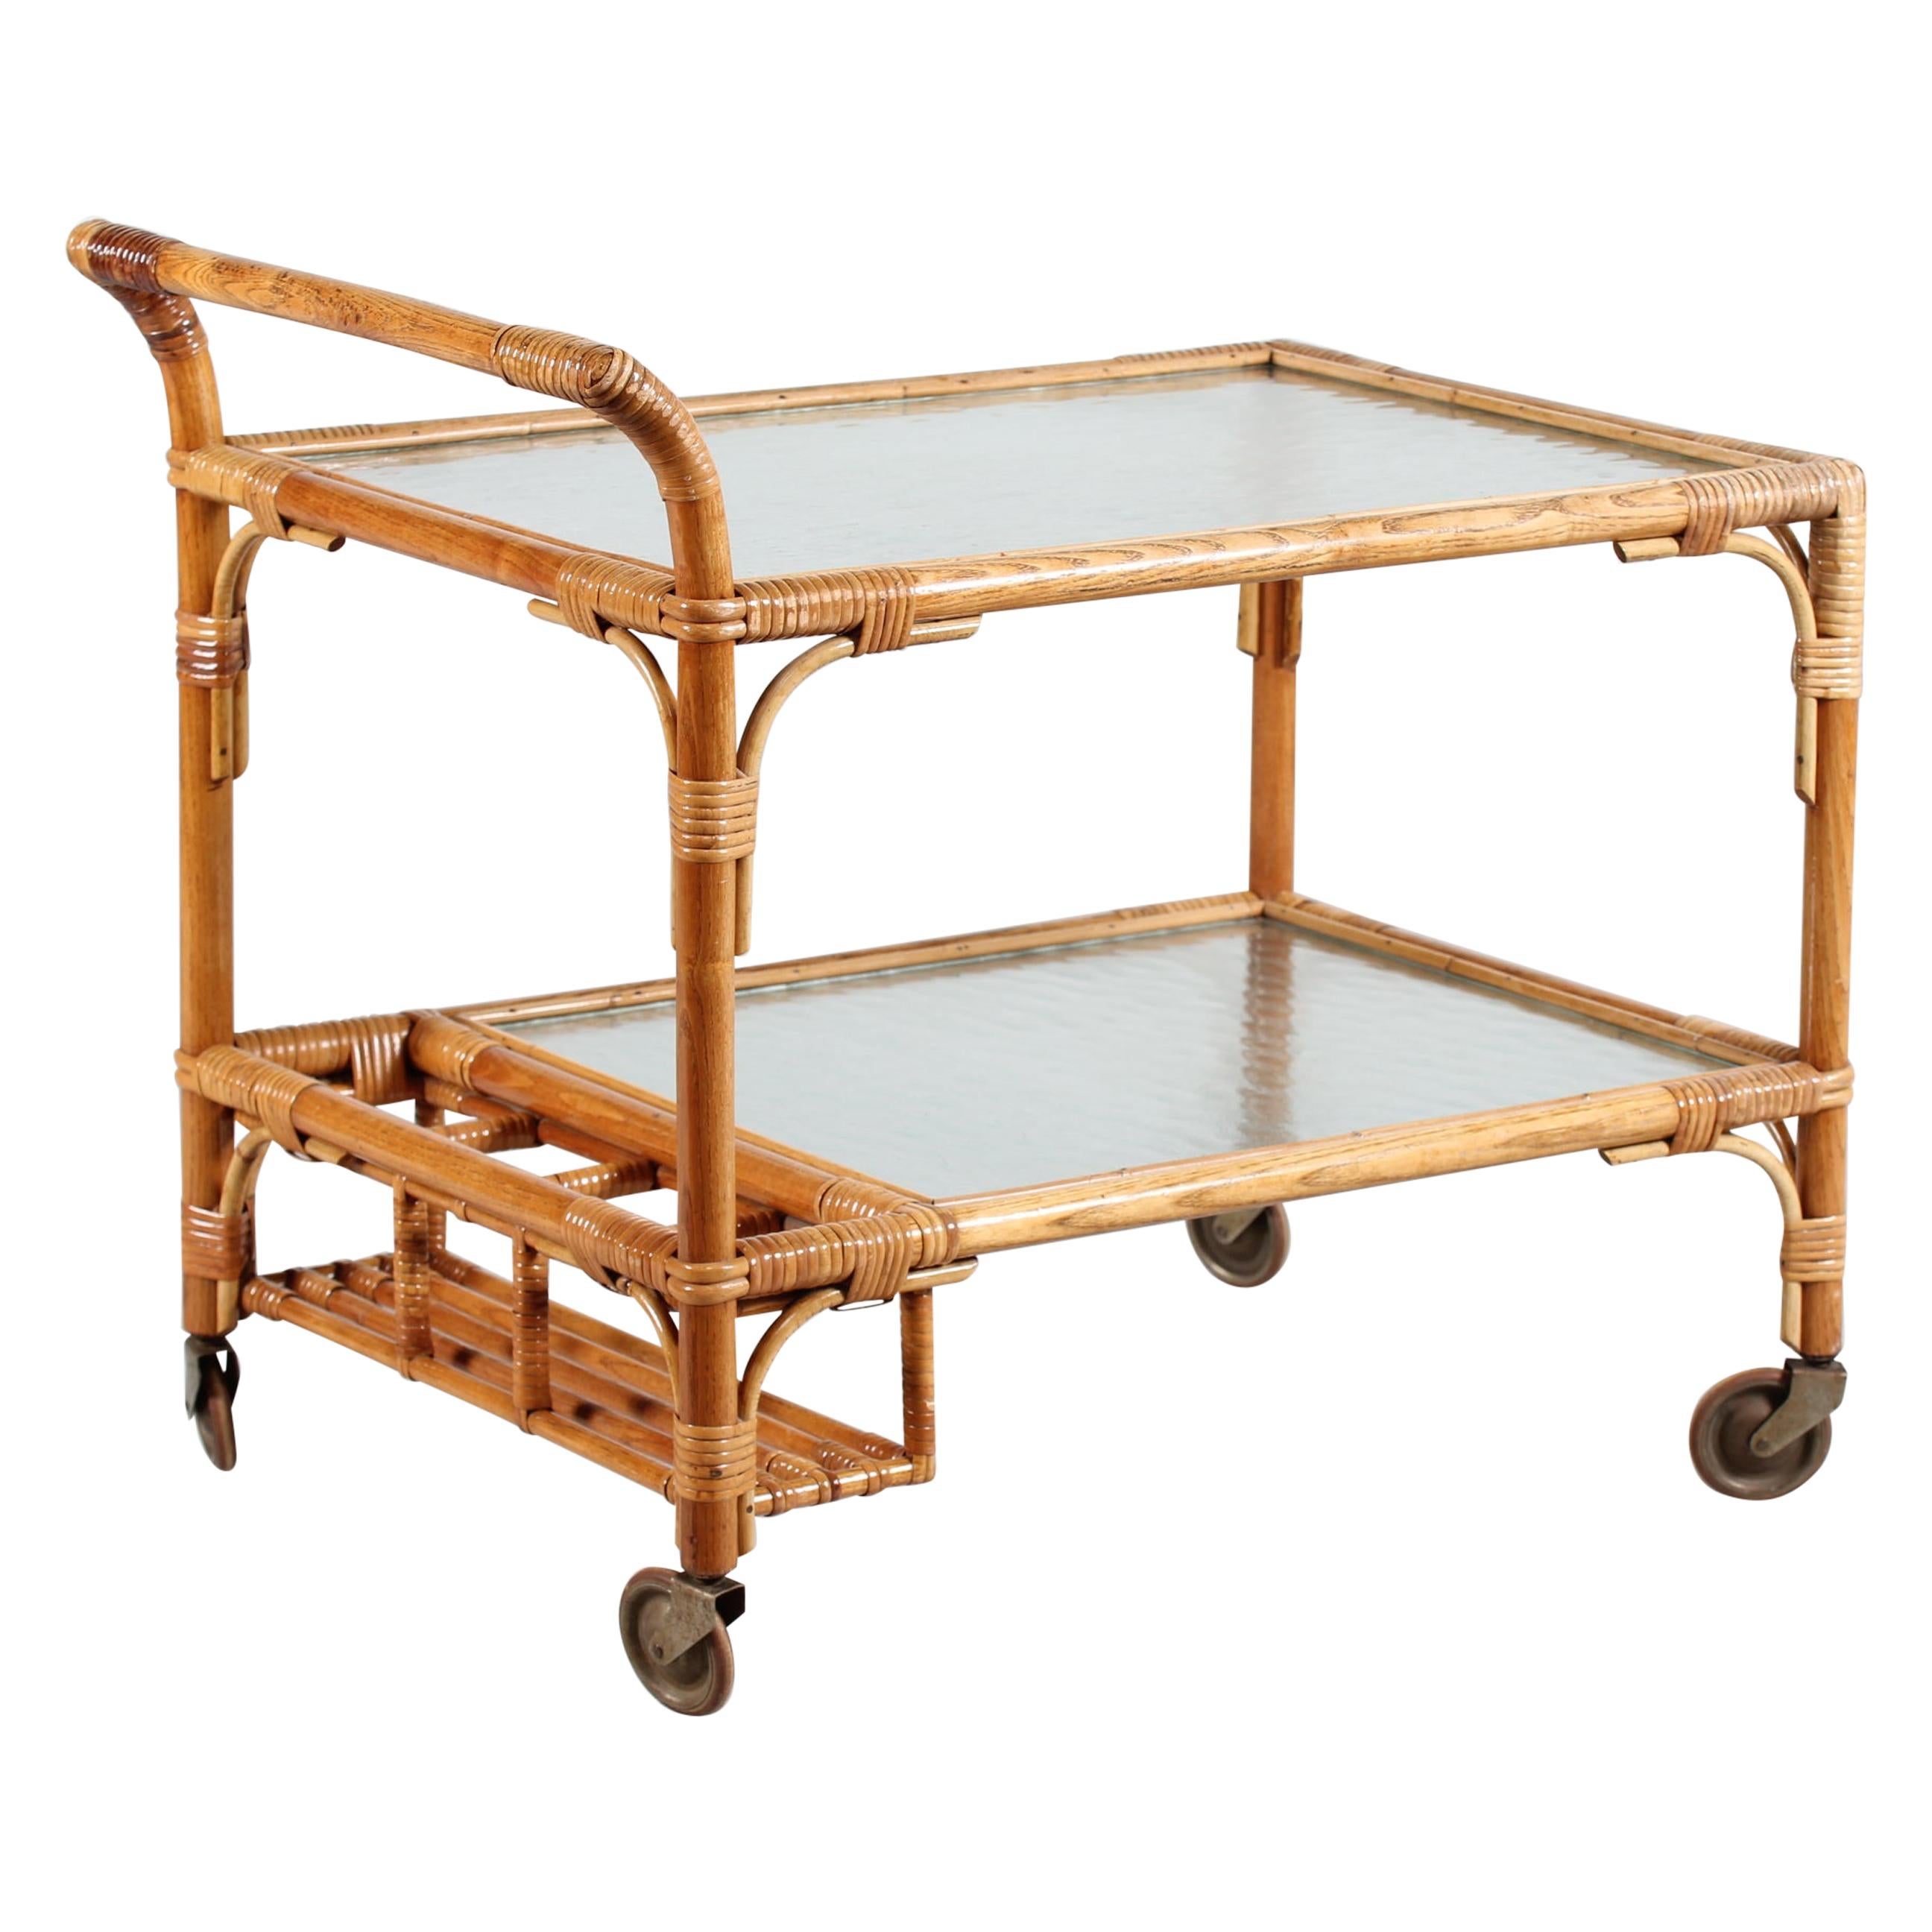 Vintage Cane Bar/Drinks Trolley on Wheels with Frosted Glass, Denmark, 1950s